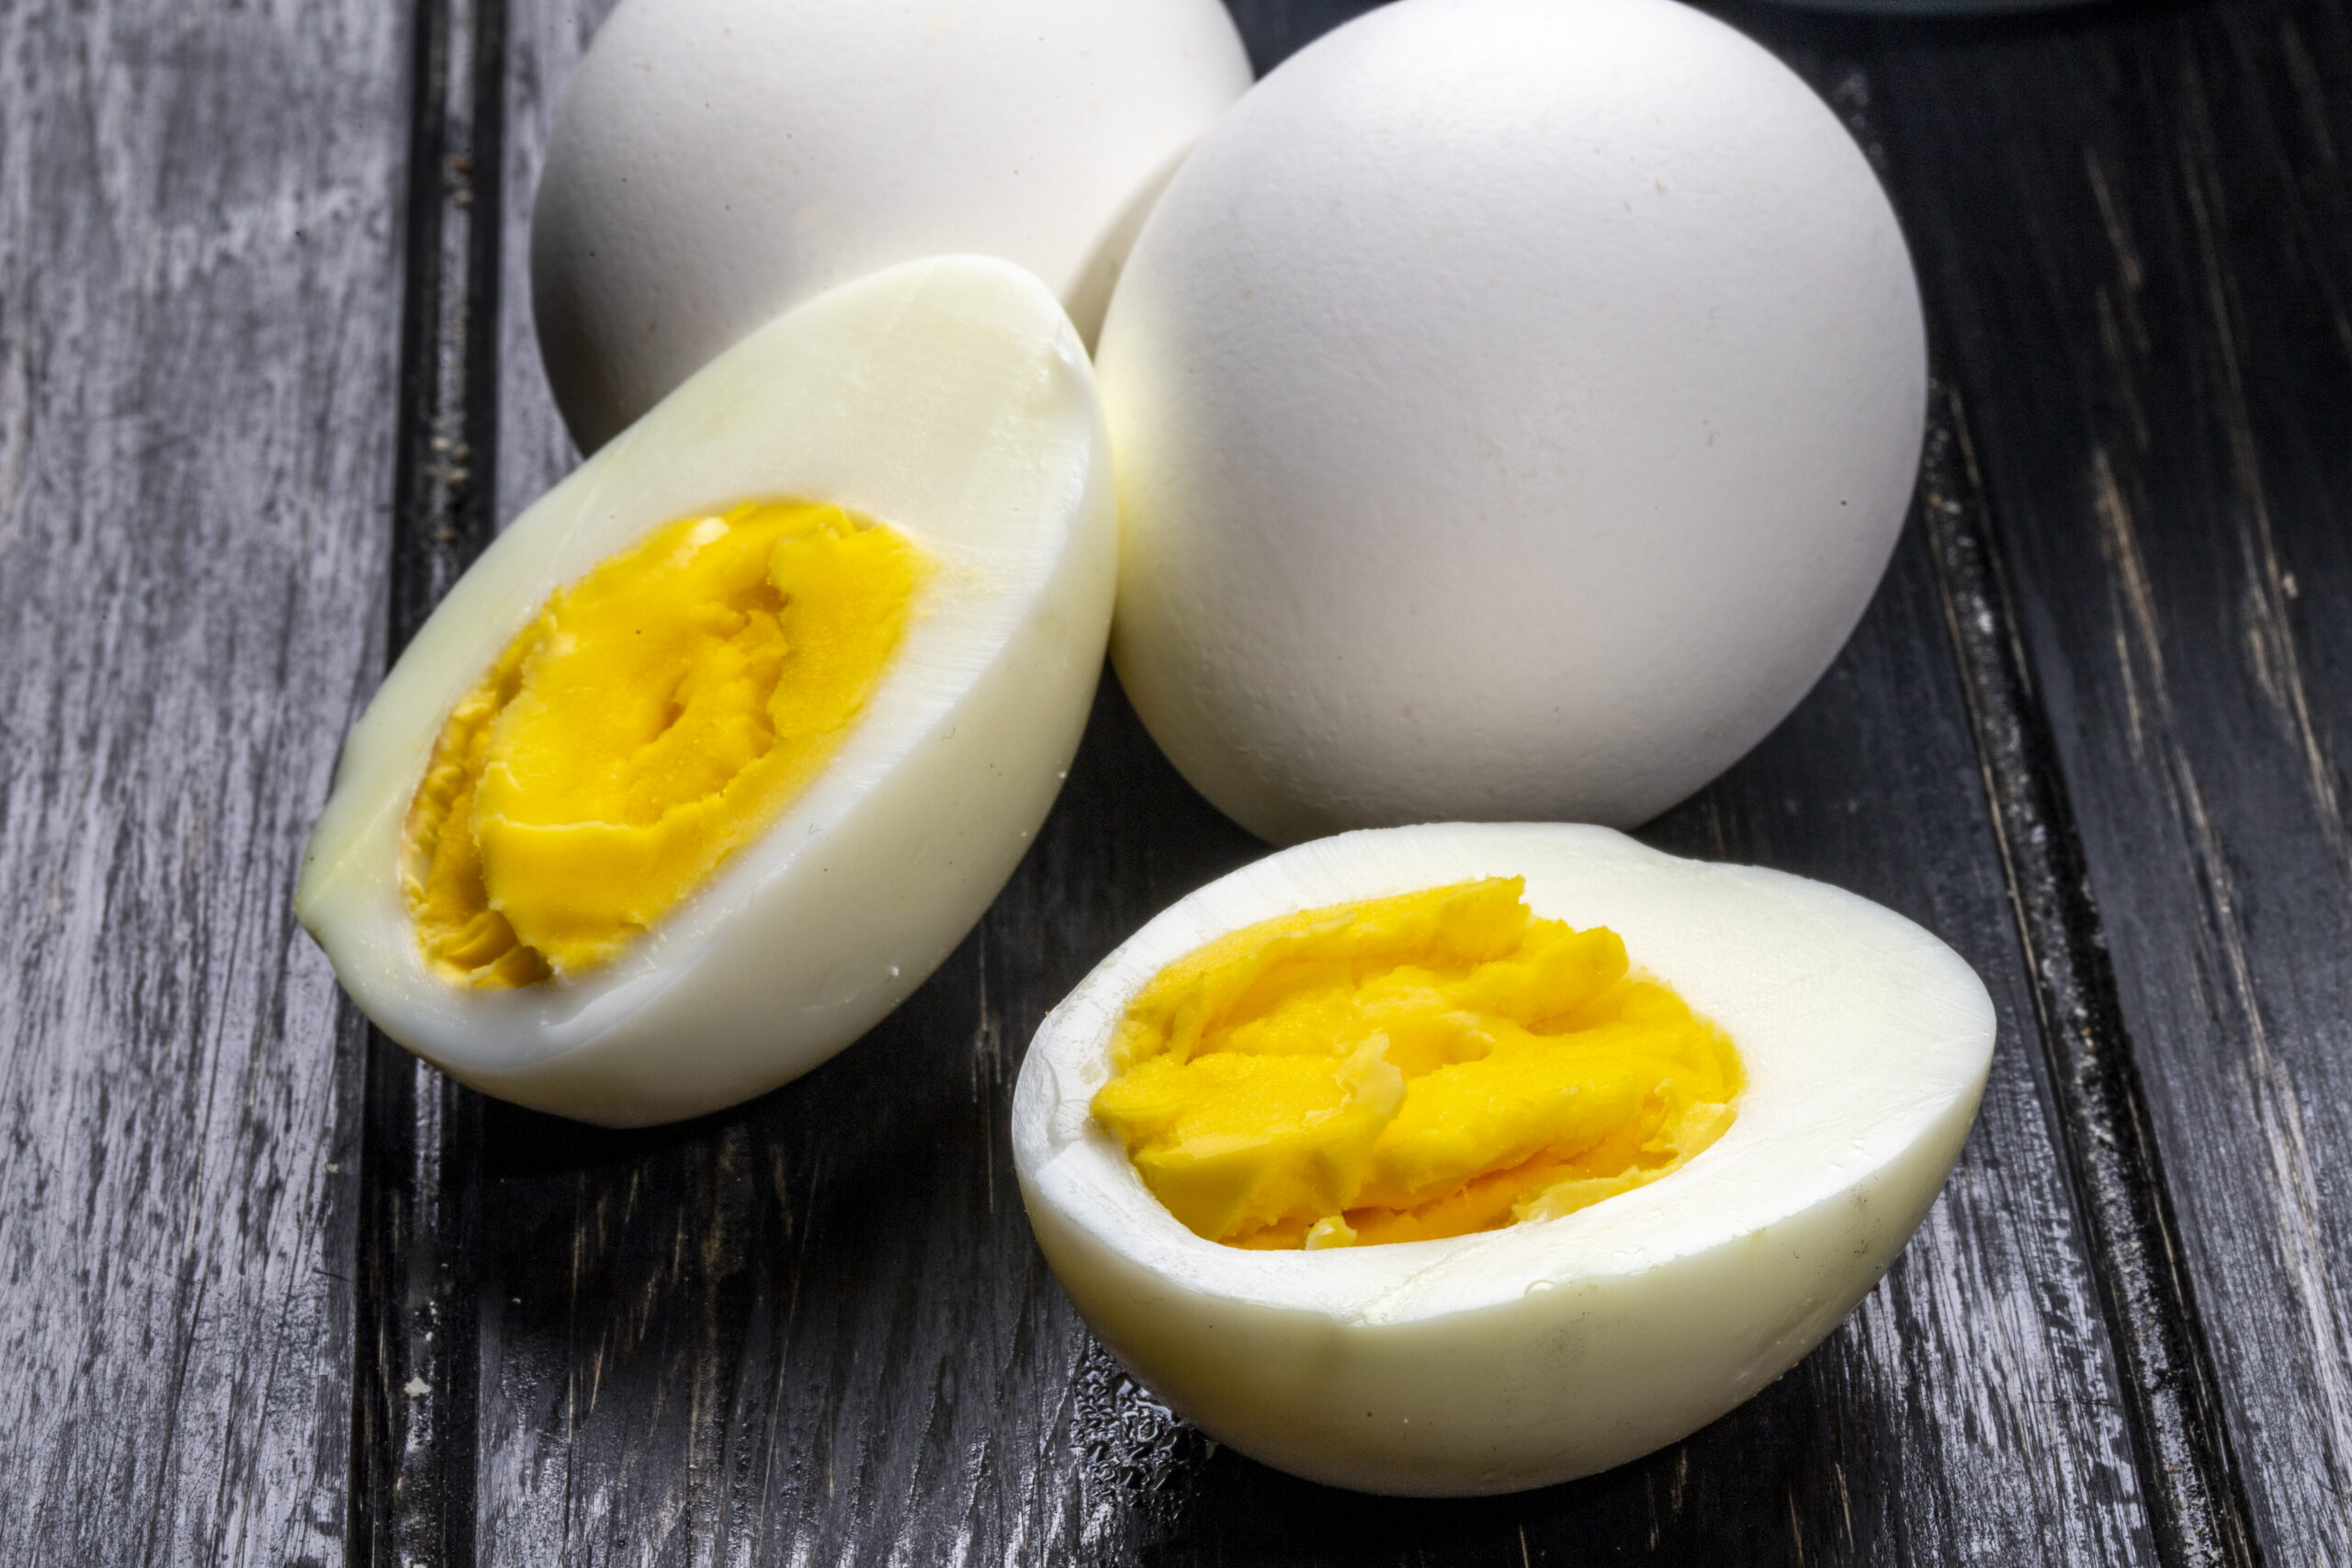 Tips for Perfect Boiled Eggs